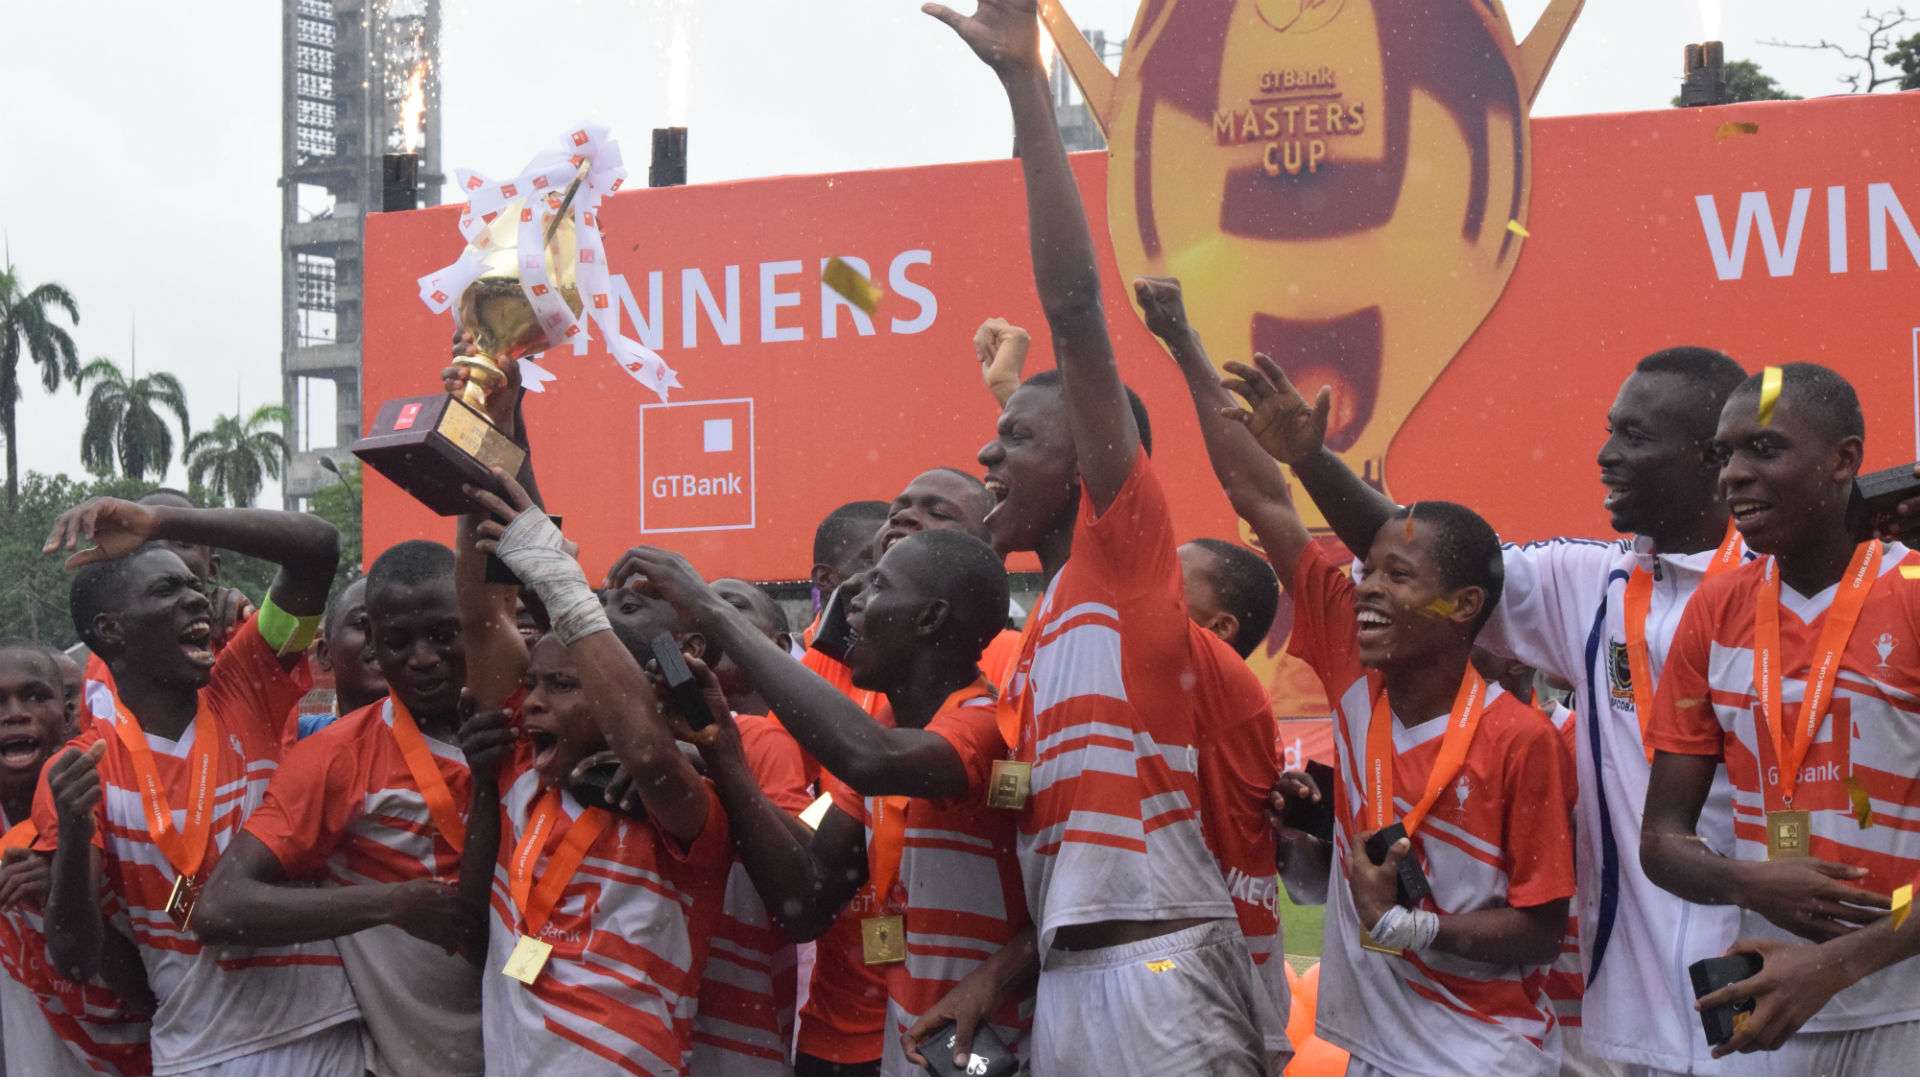 St. Finbarrs College are GTBank Masters Cup Champions